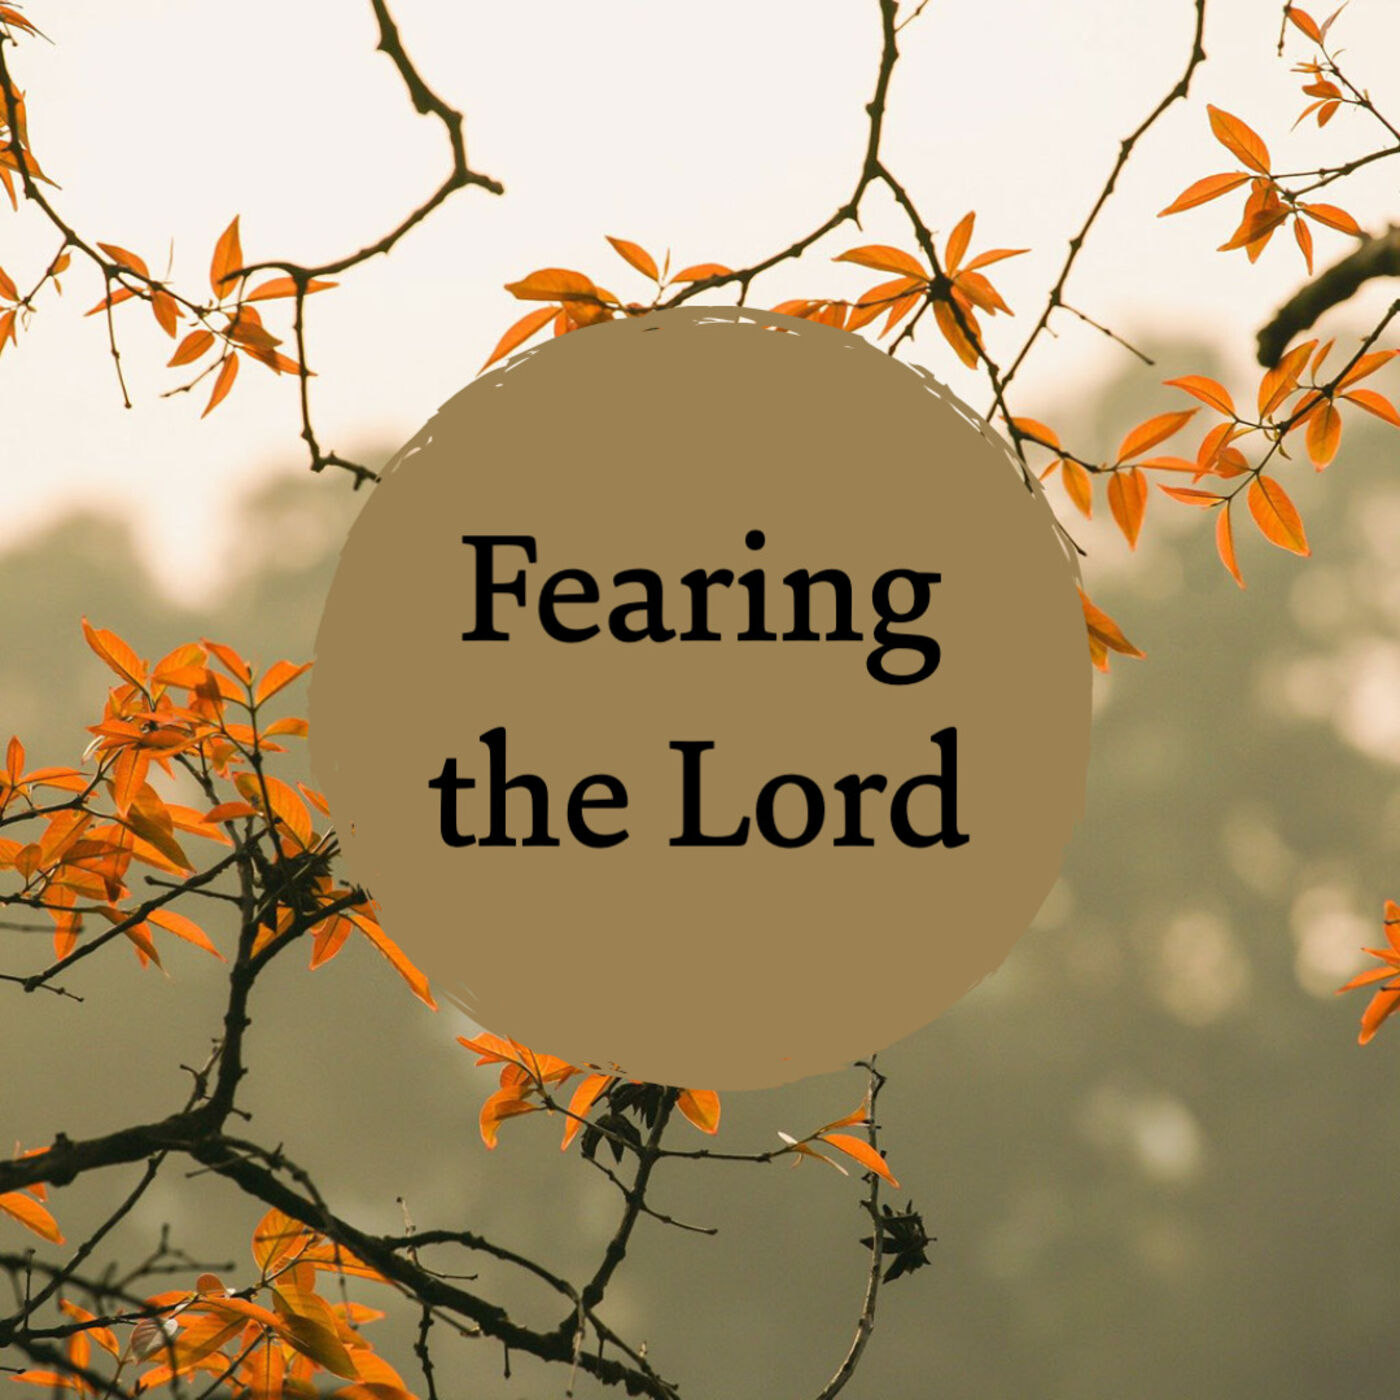 Fearing the Lord